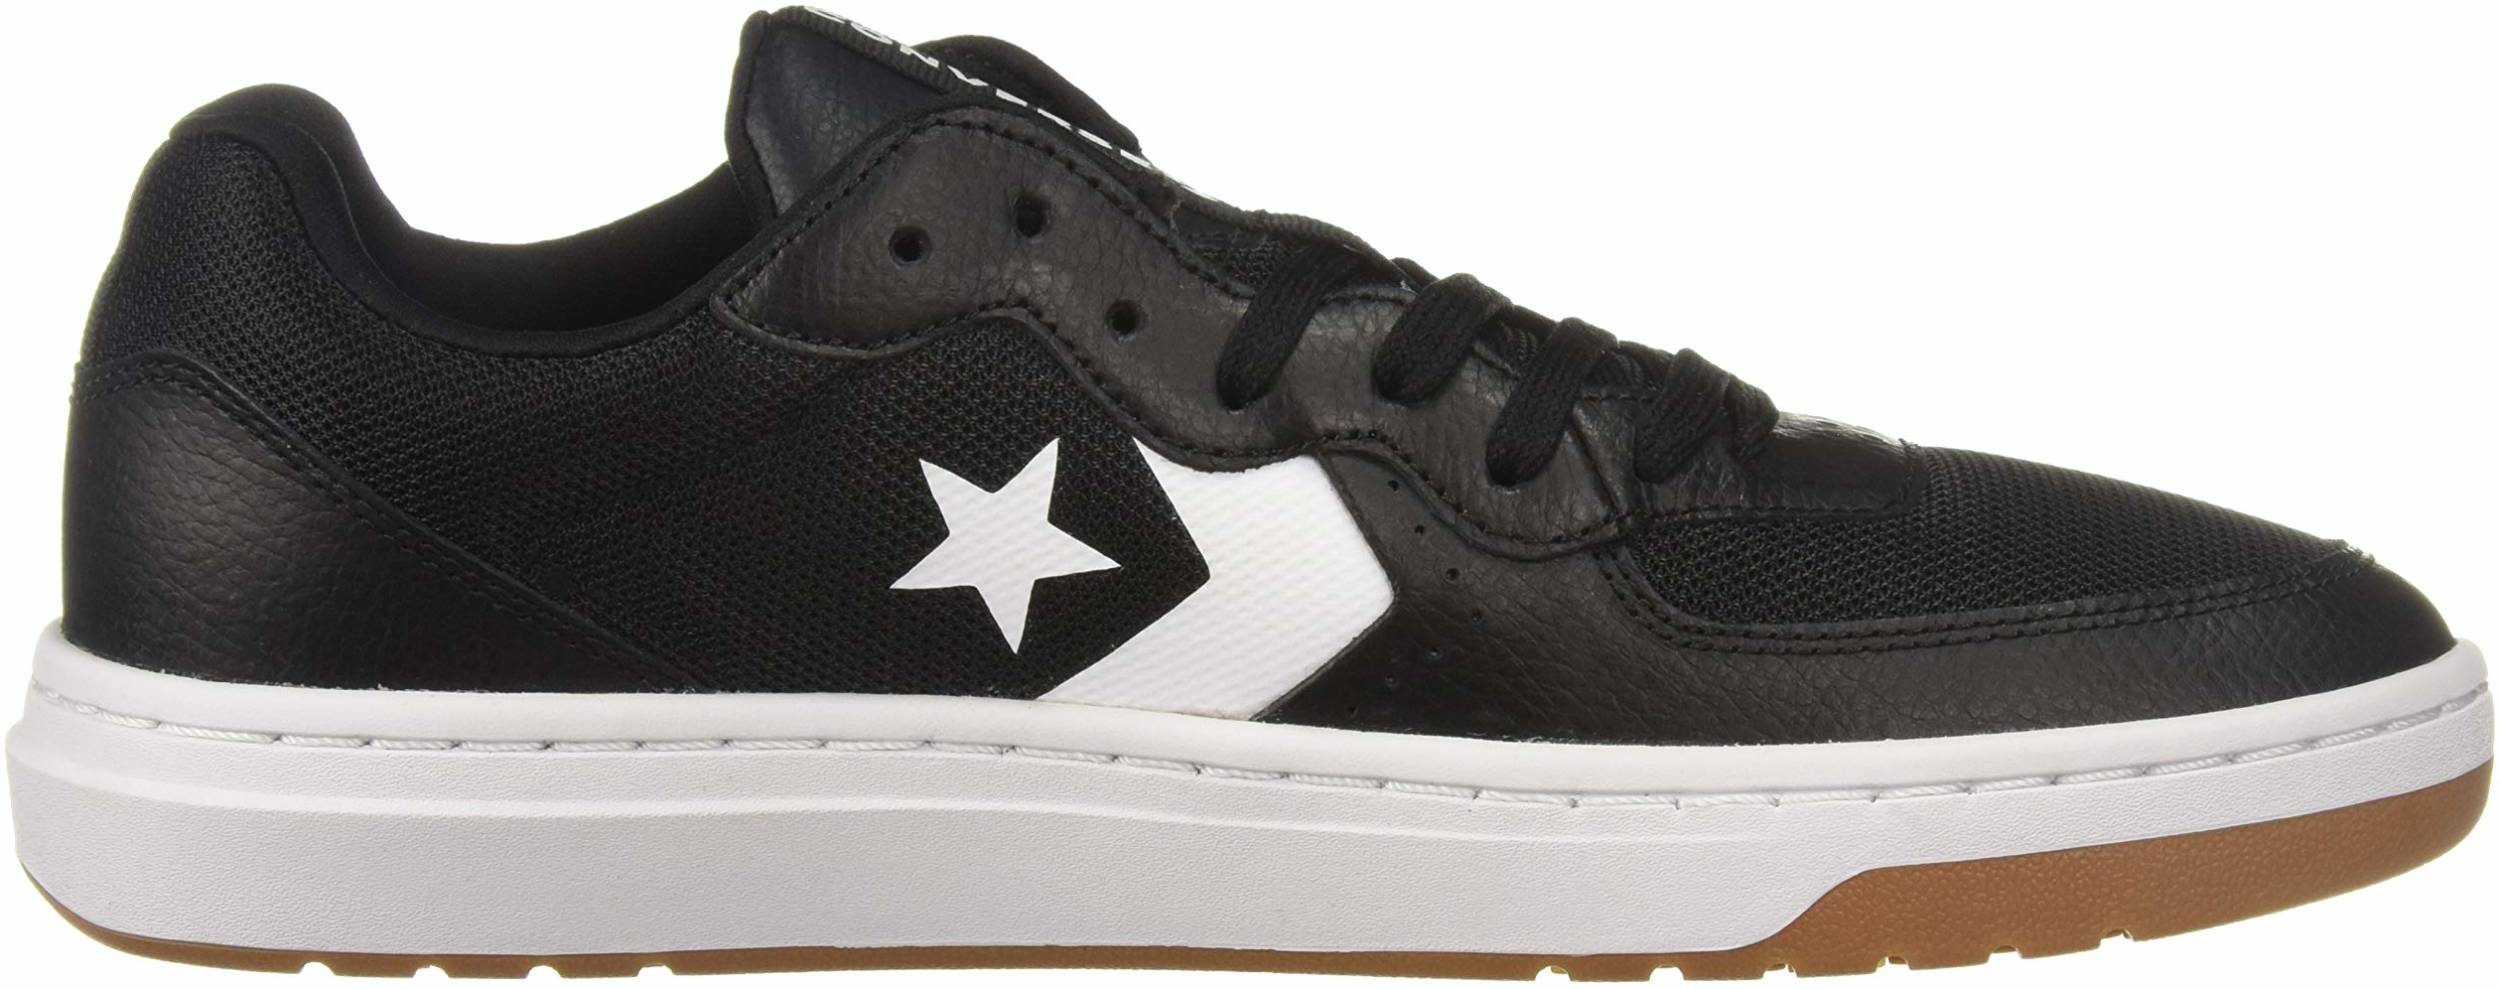 40+ Converse cheap sneakers: Save up to 